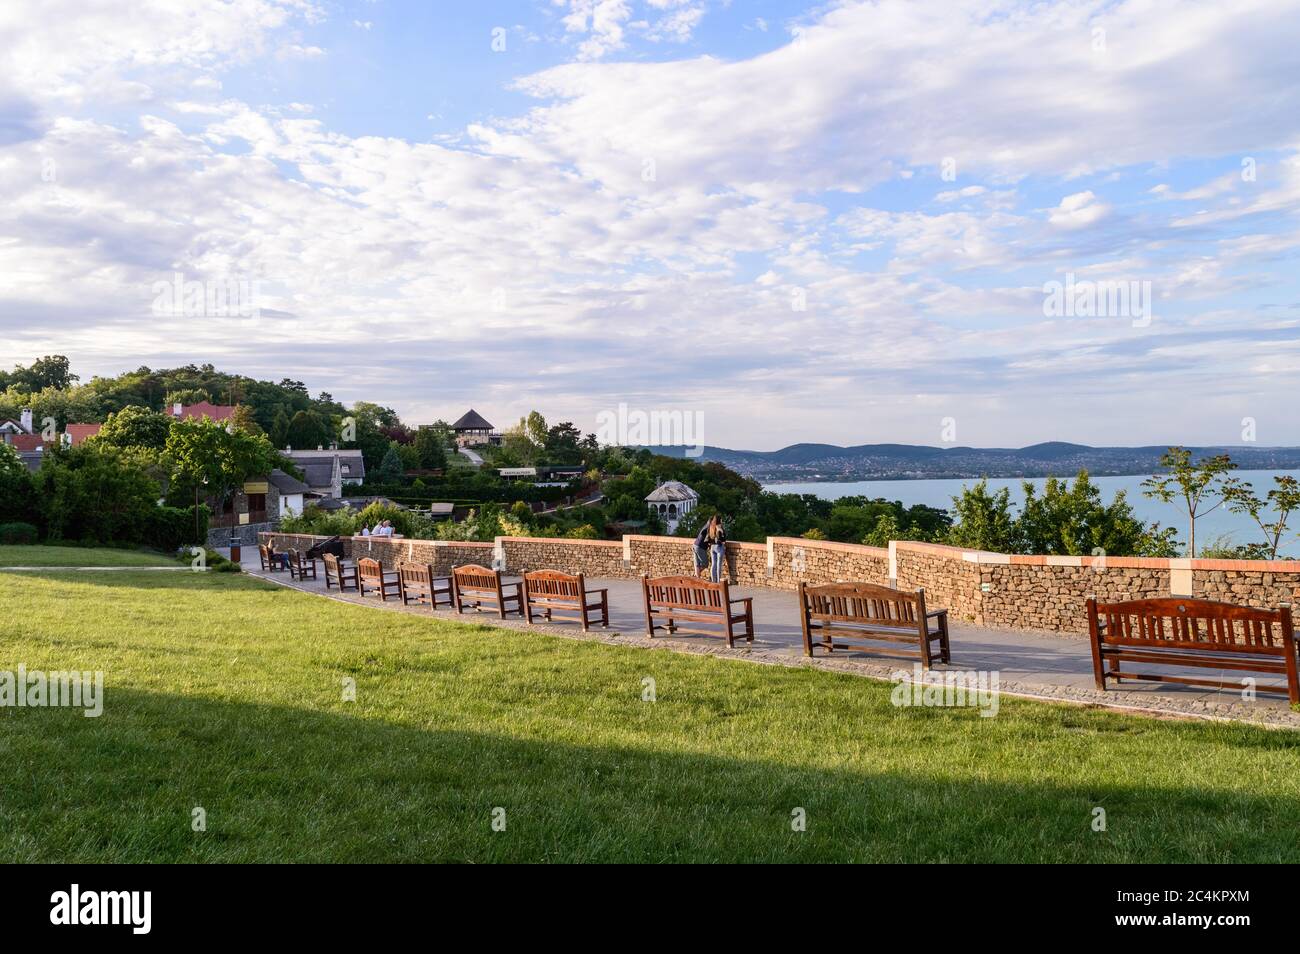 Tihany, Hungary - May 10, 2020: View from Tihany at sunset, with benches and people in the foreground Stock Photo